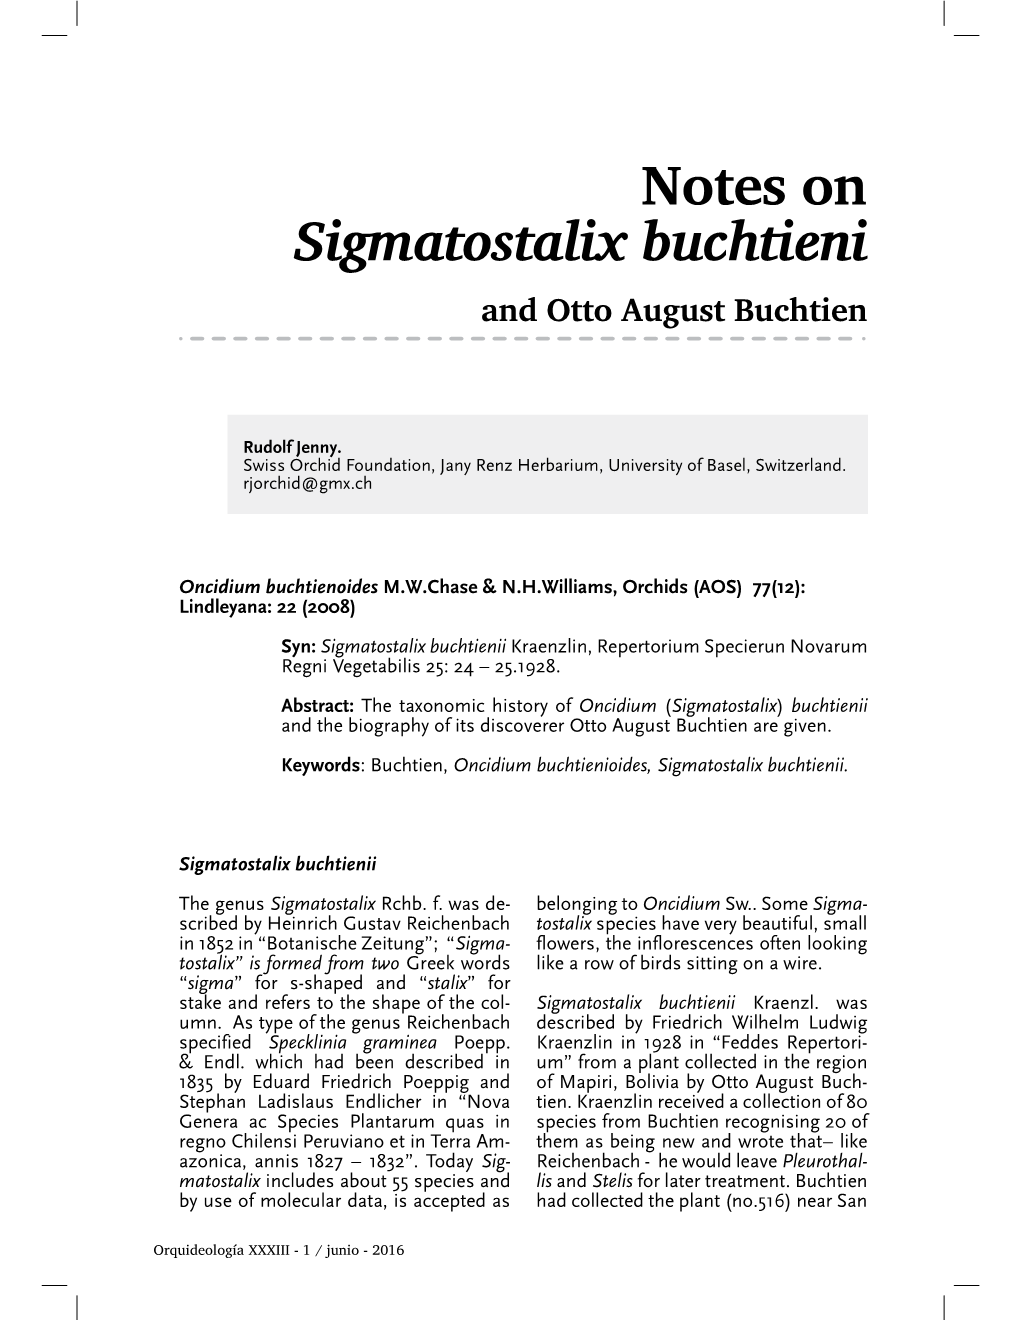 Notes on Sigmatostalix Buchtieni and Otto August Buchtien